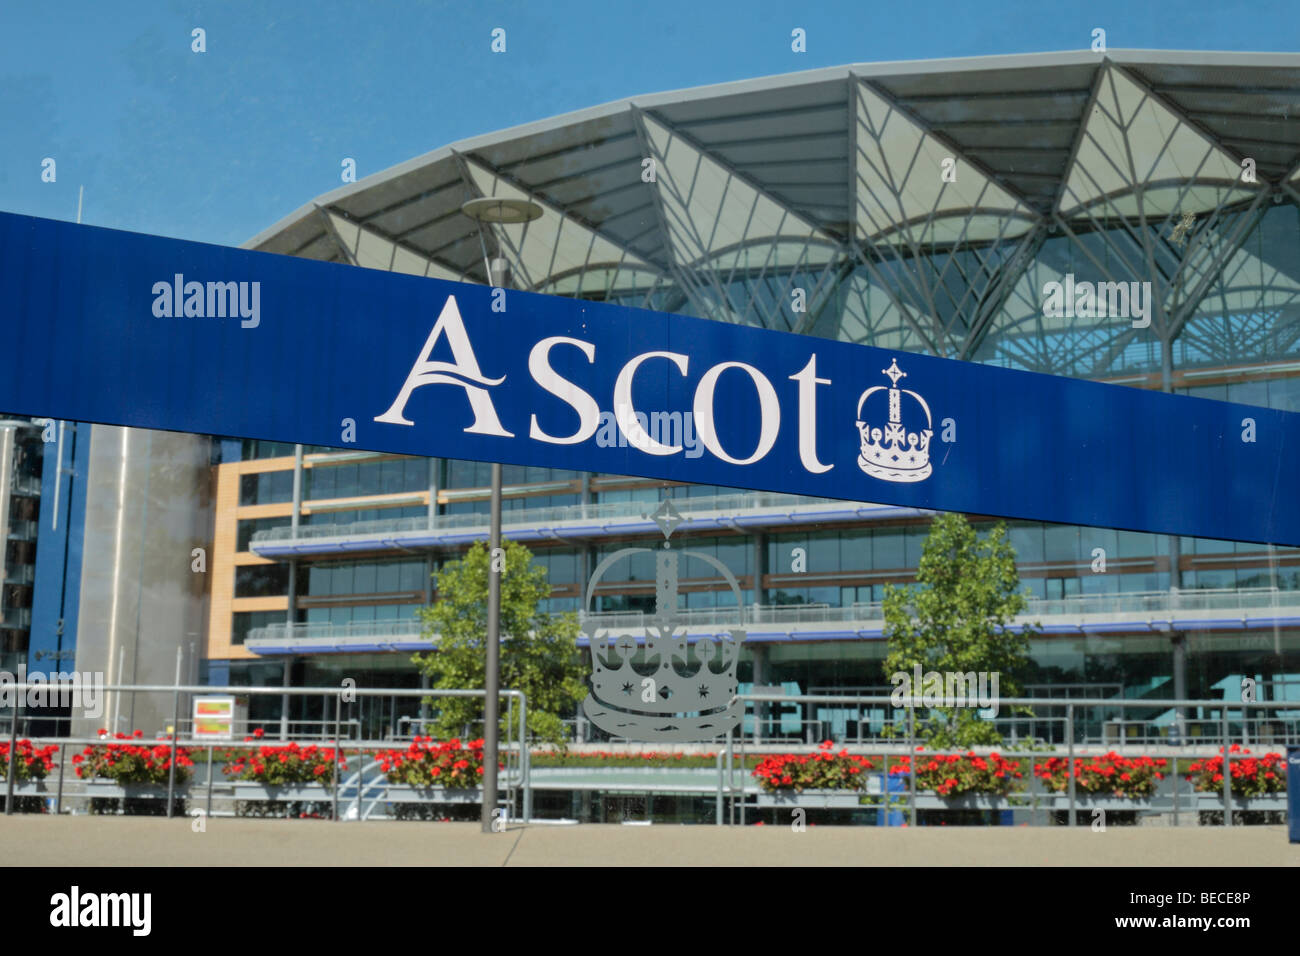 View through a glass panel with the 'Ascot' name and logo towards the main Grandstand at Ascot Racecourse, Berkshire, UK. Stock Photo